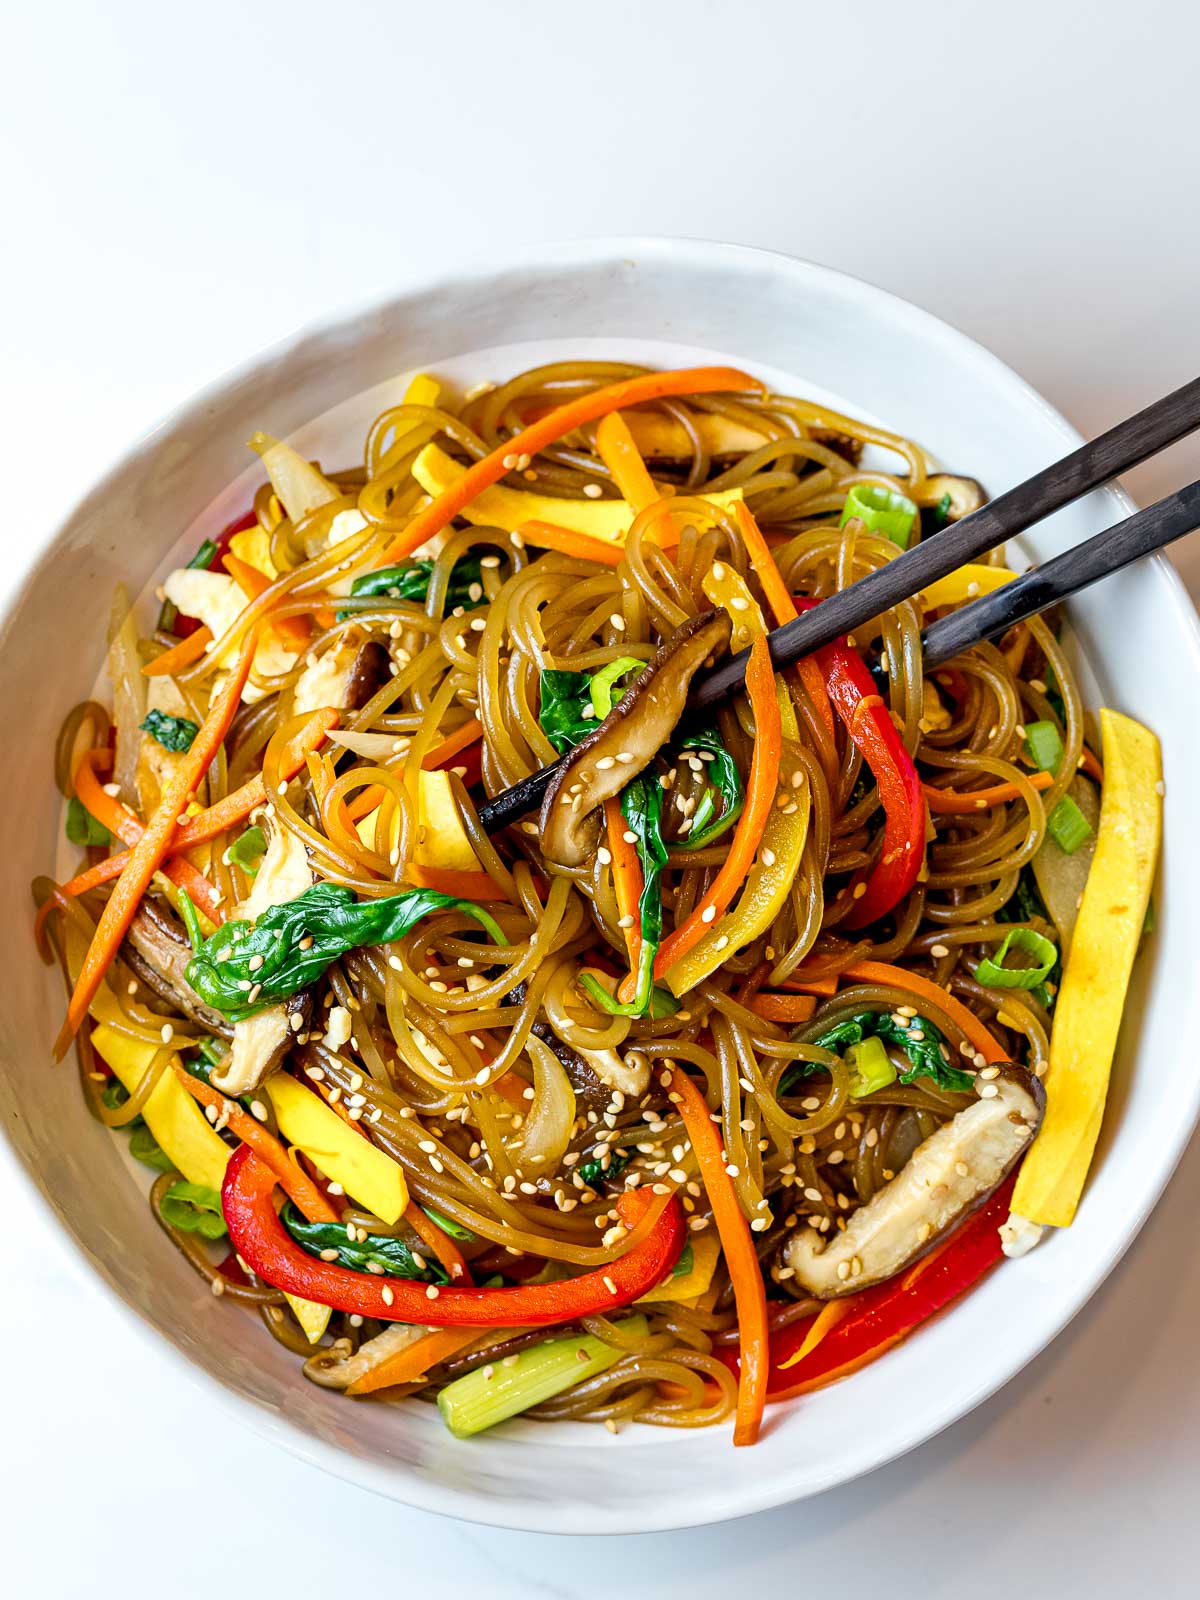 japchae noodles with red peppers, carrots, and shiitake mushrooms in a white bowl with chopsticks